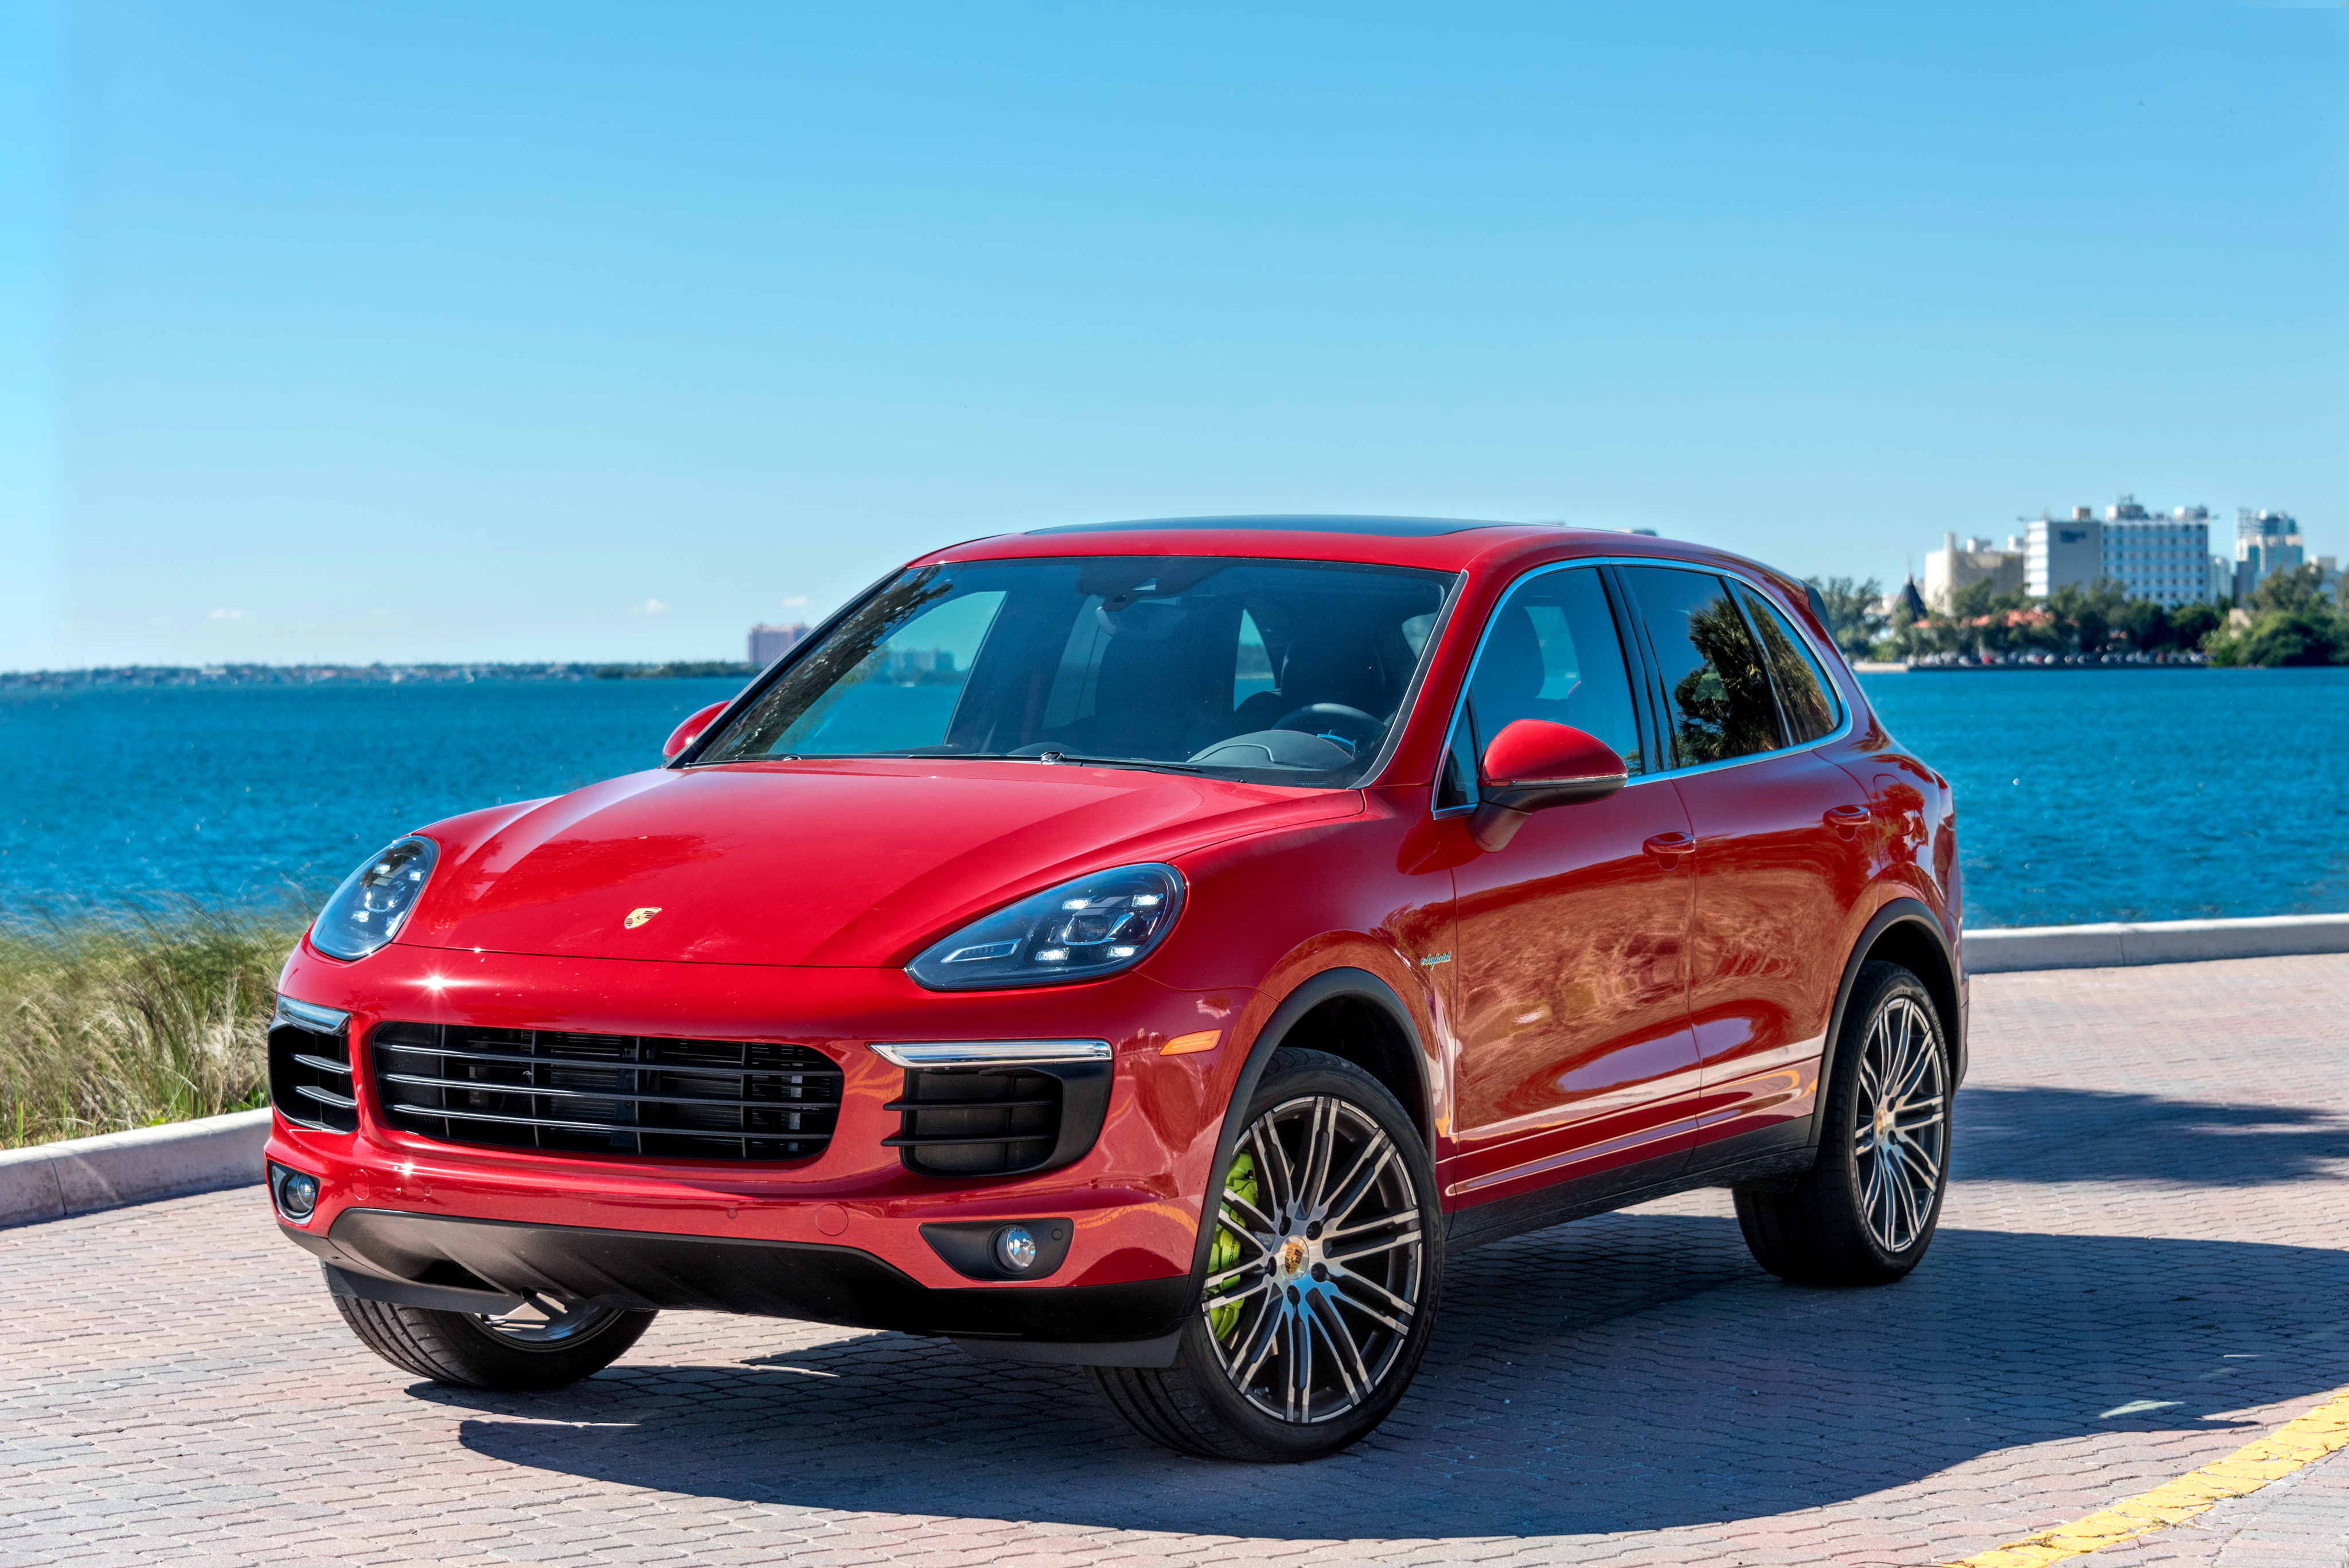 Porsche Cayenne Wallpapers, Pictures, Images